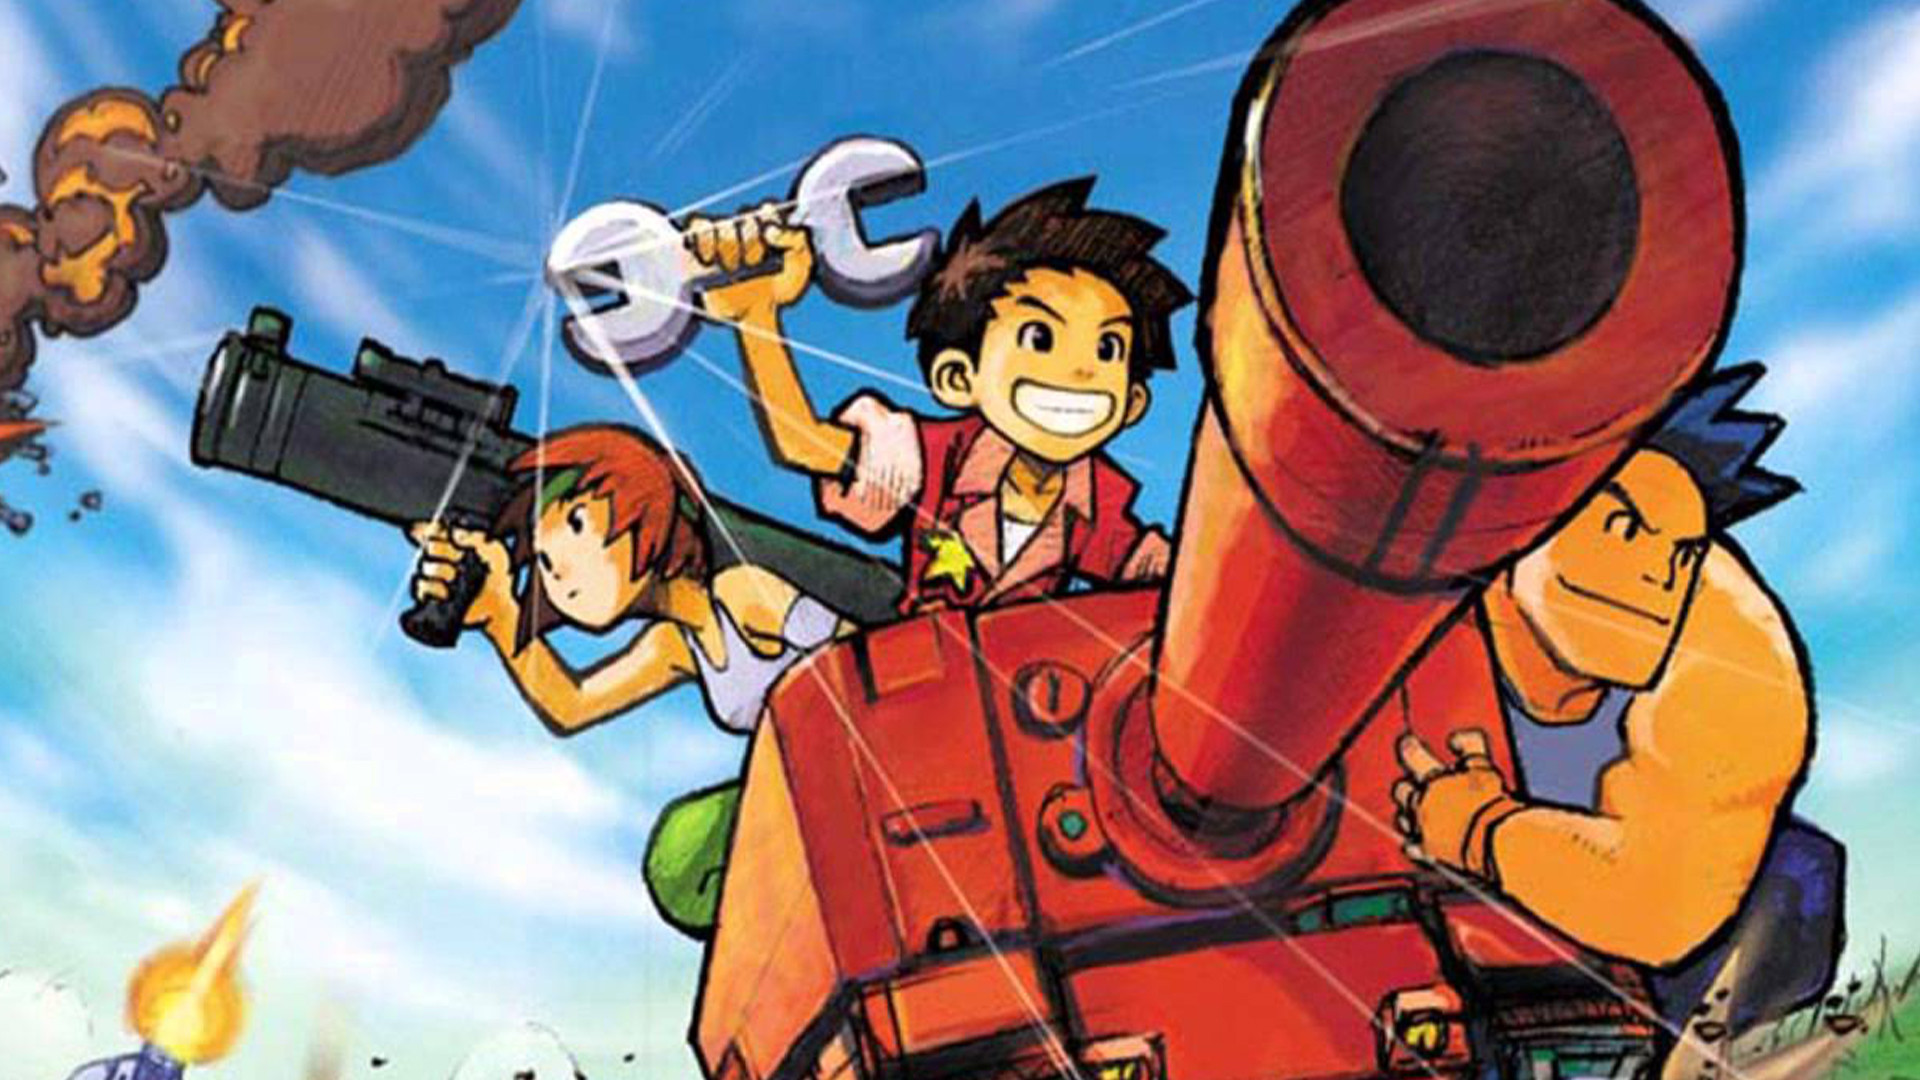 1920x1080 A Wargroove player is remaking the Advance Wars campaign .